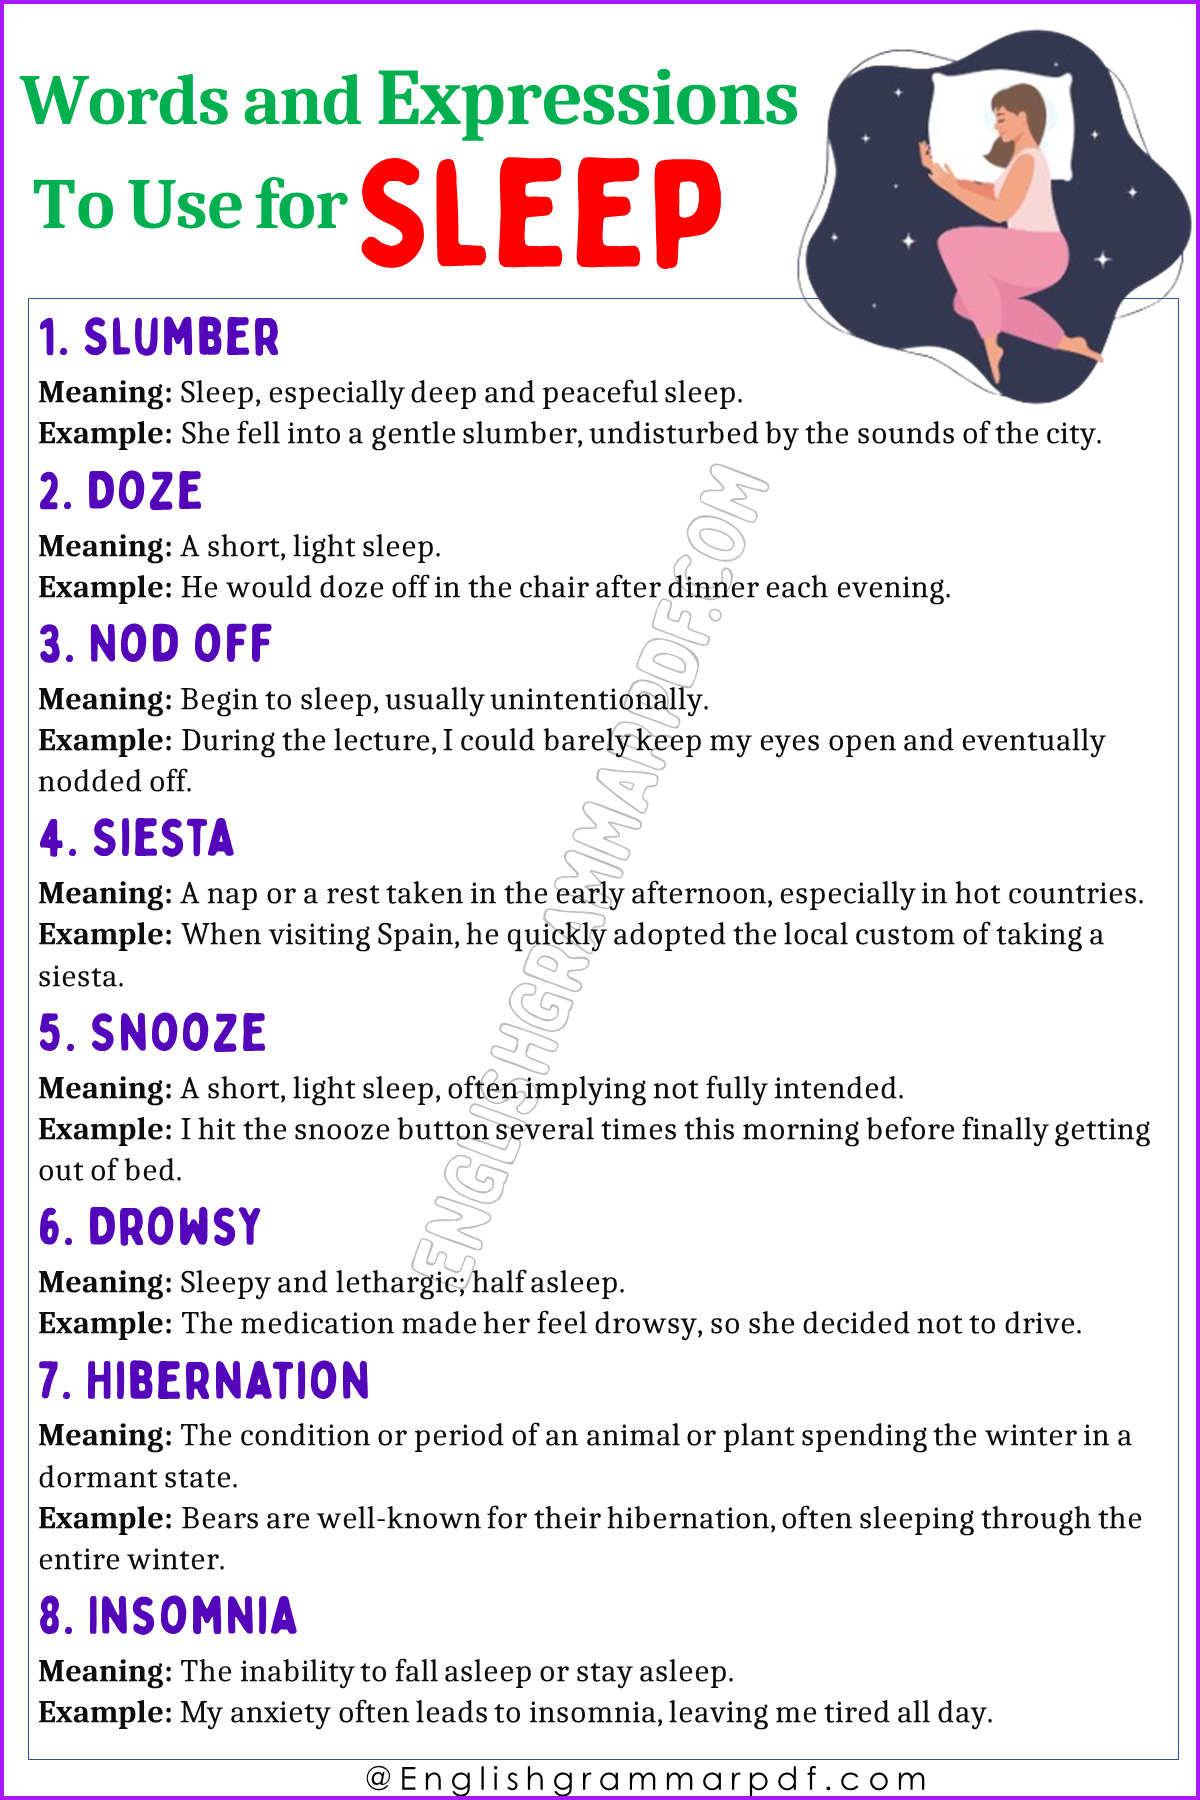 Words and Expressions to Use for Sleep